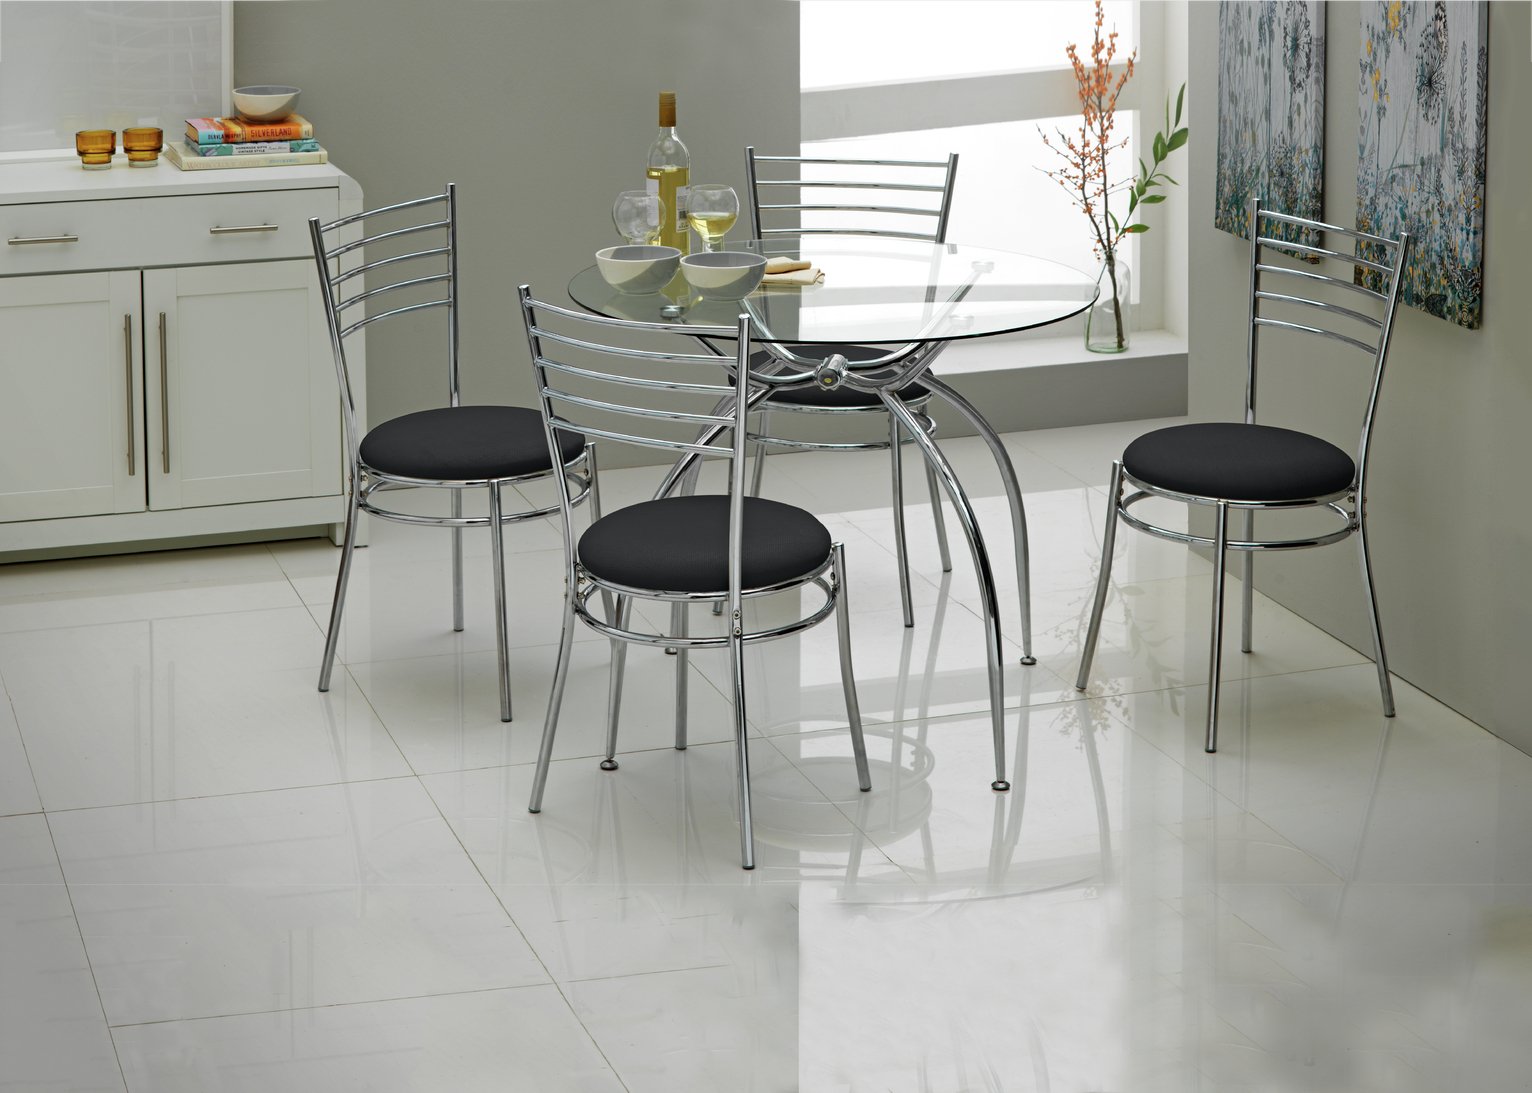 Argos Home Lusi Glass Dining Table & 4 Black Chairs Review